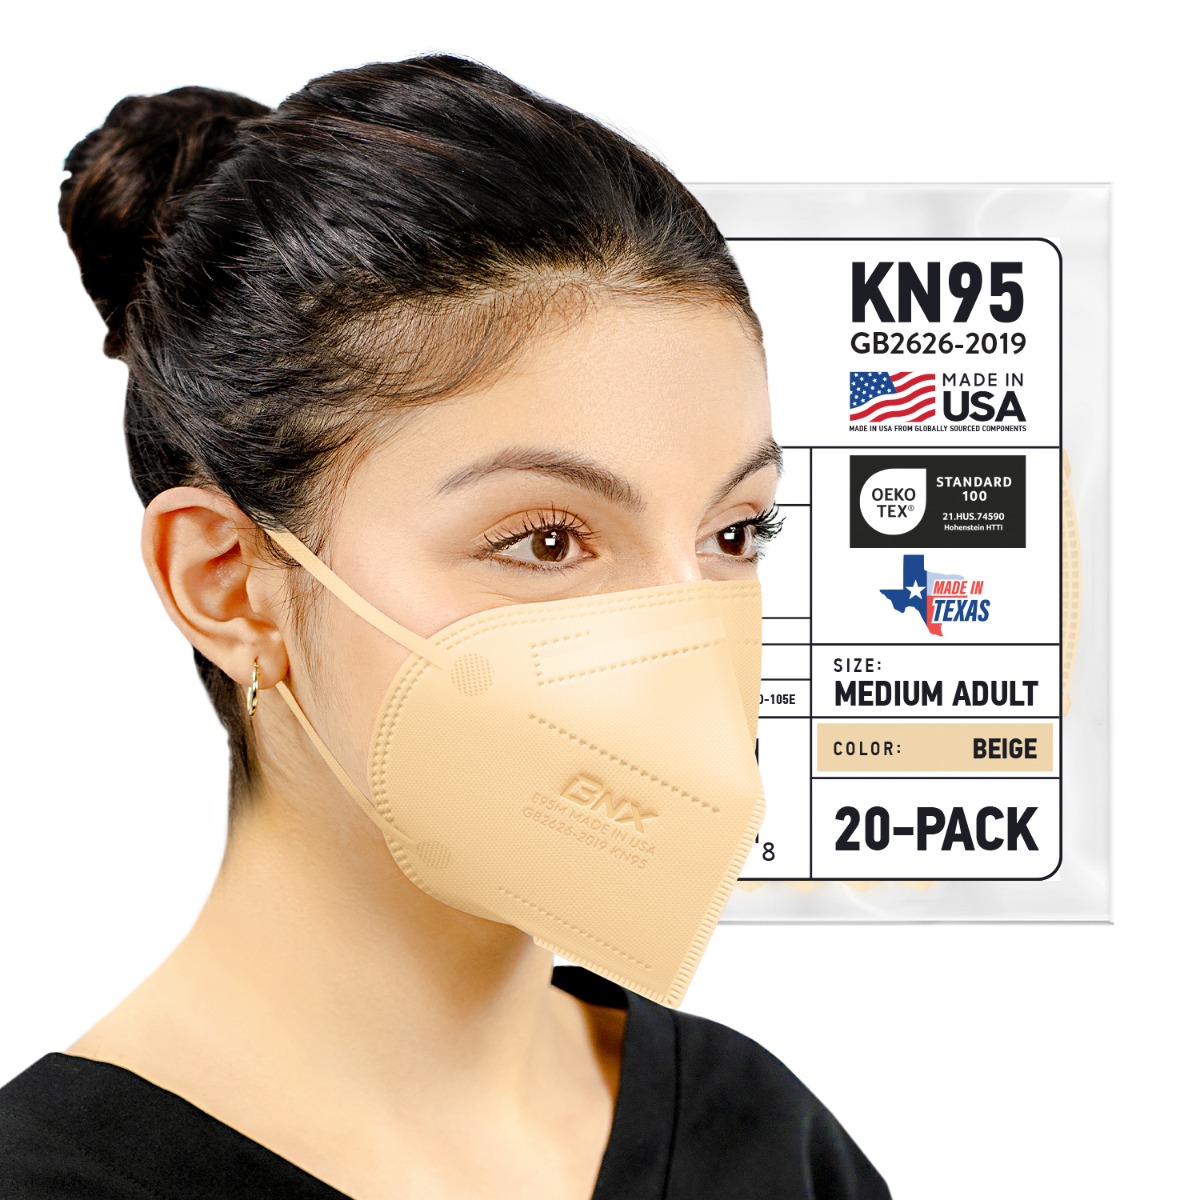 BNX 20-Pack KN95 E95M Protective Face Mask, Disposable Particulate Mask Made in USA, Protection Against Dust, Pollen and Haze, Beige (20 Pack) (Earloop) (Model: E95M) Size: Adult Medium